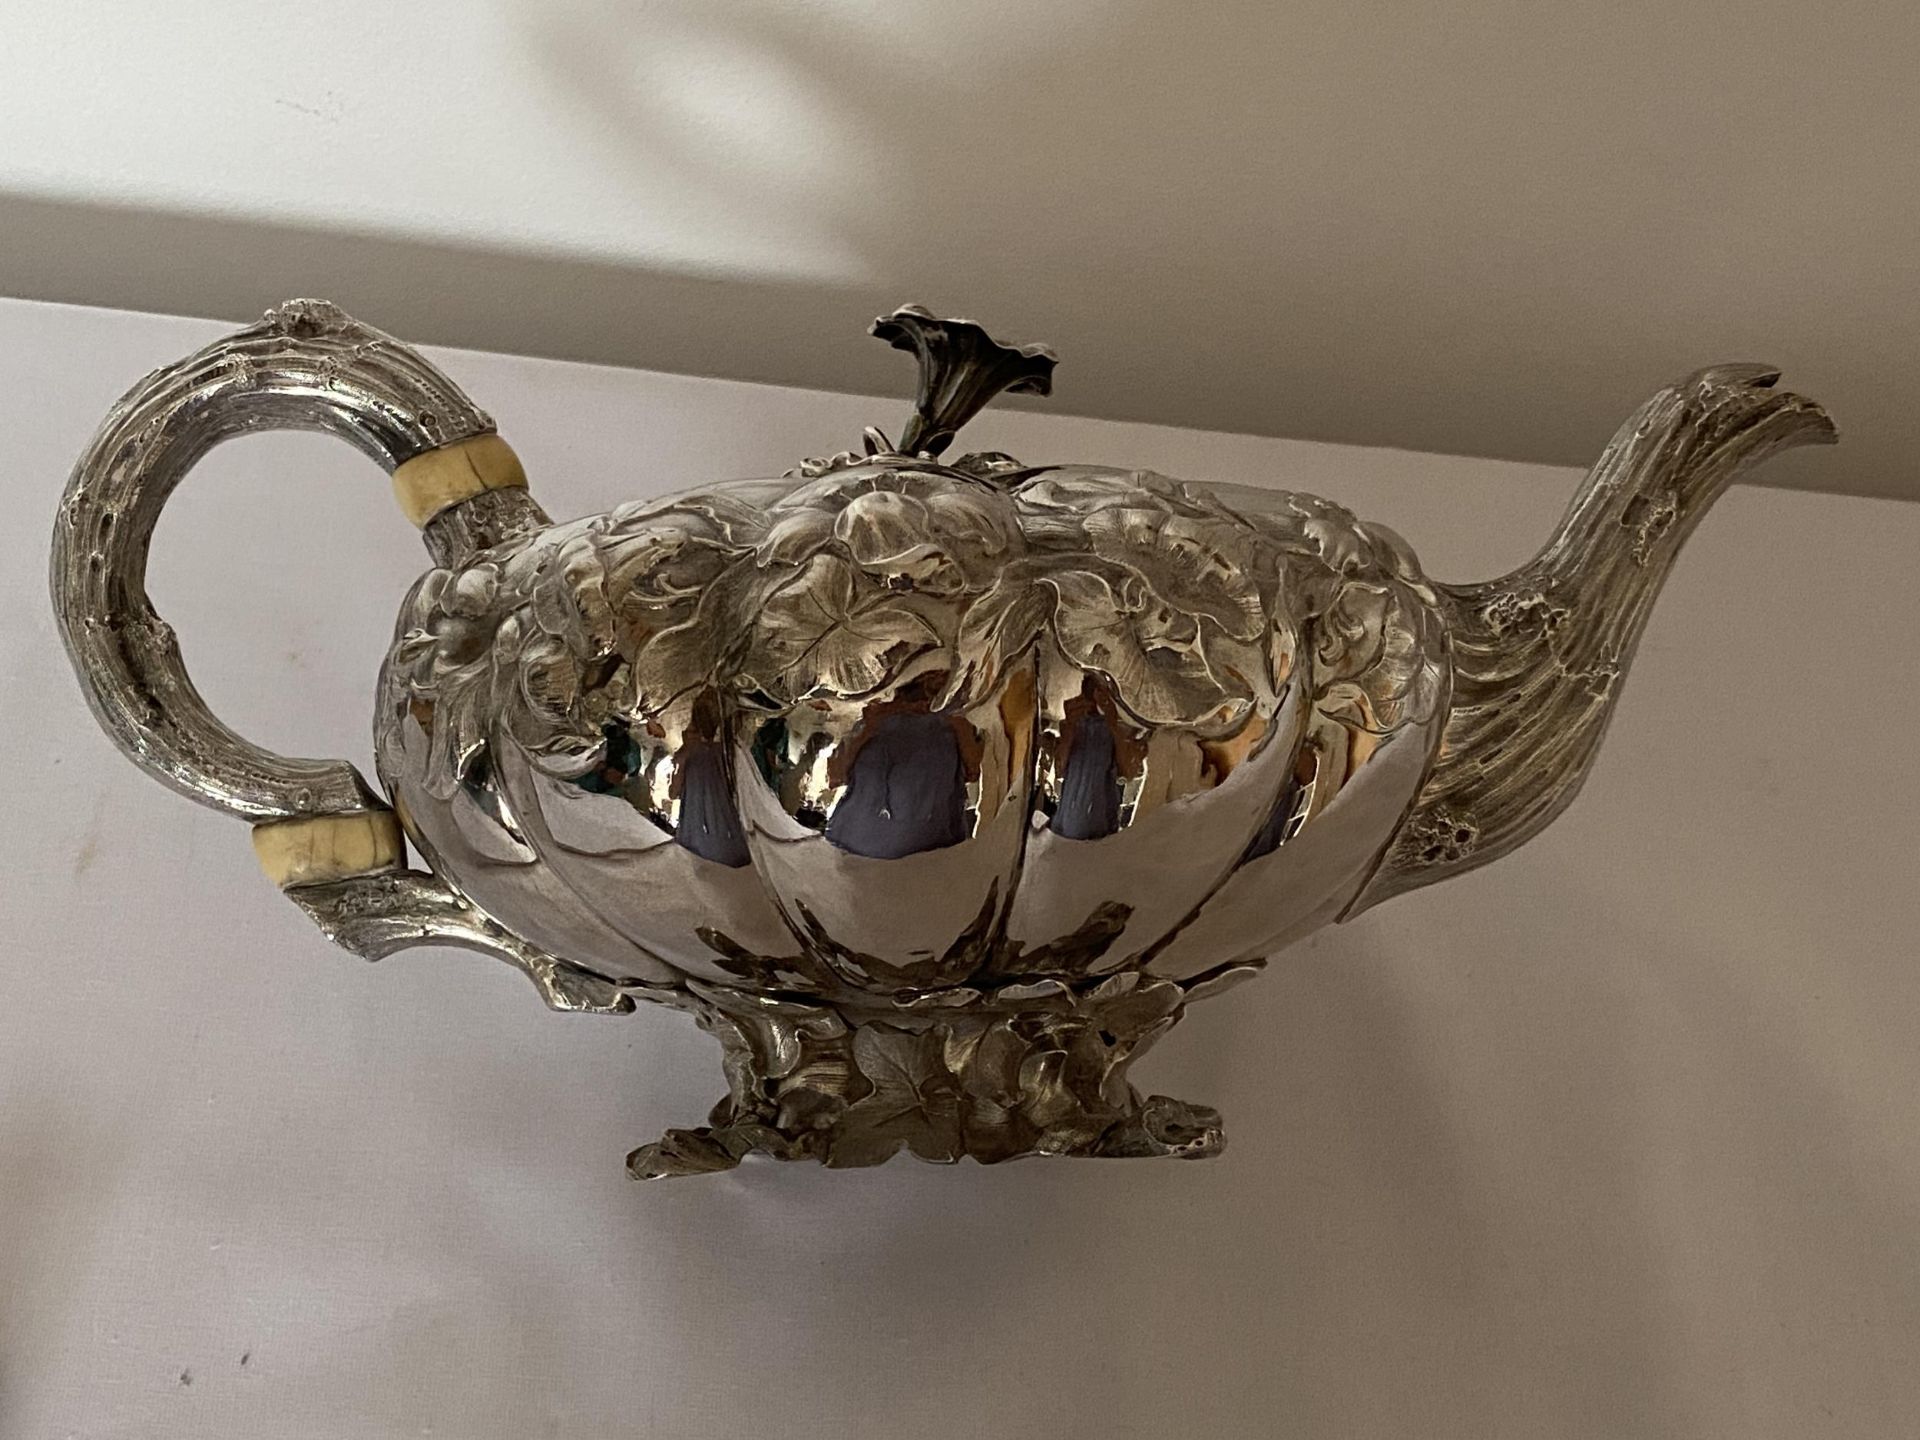 A VICTORIAN 1840 HALLMARKED LONDON SILVER TEAPOT, MAKER WC, POSSIBLY WILLIAM CHANDLESS, GROSS WEIGHT - Image 14 of 21